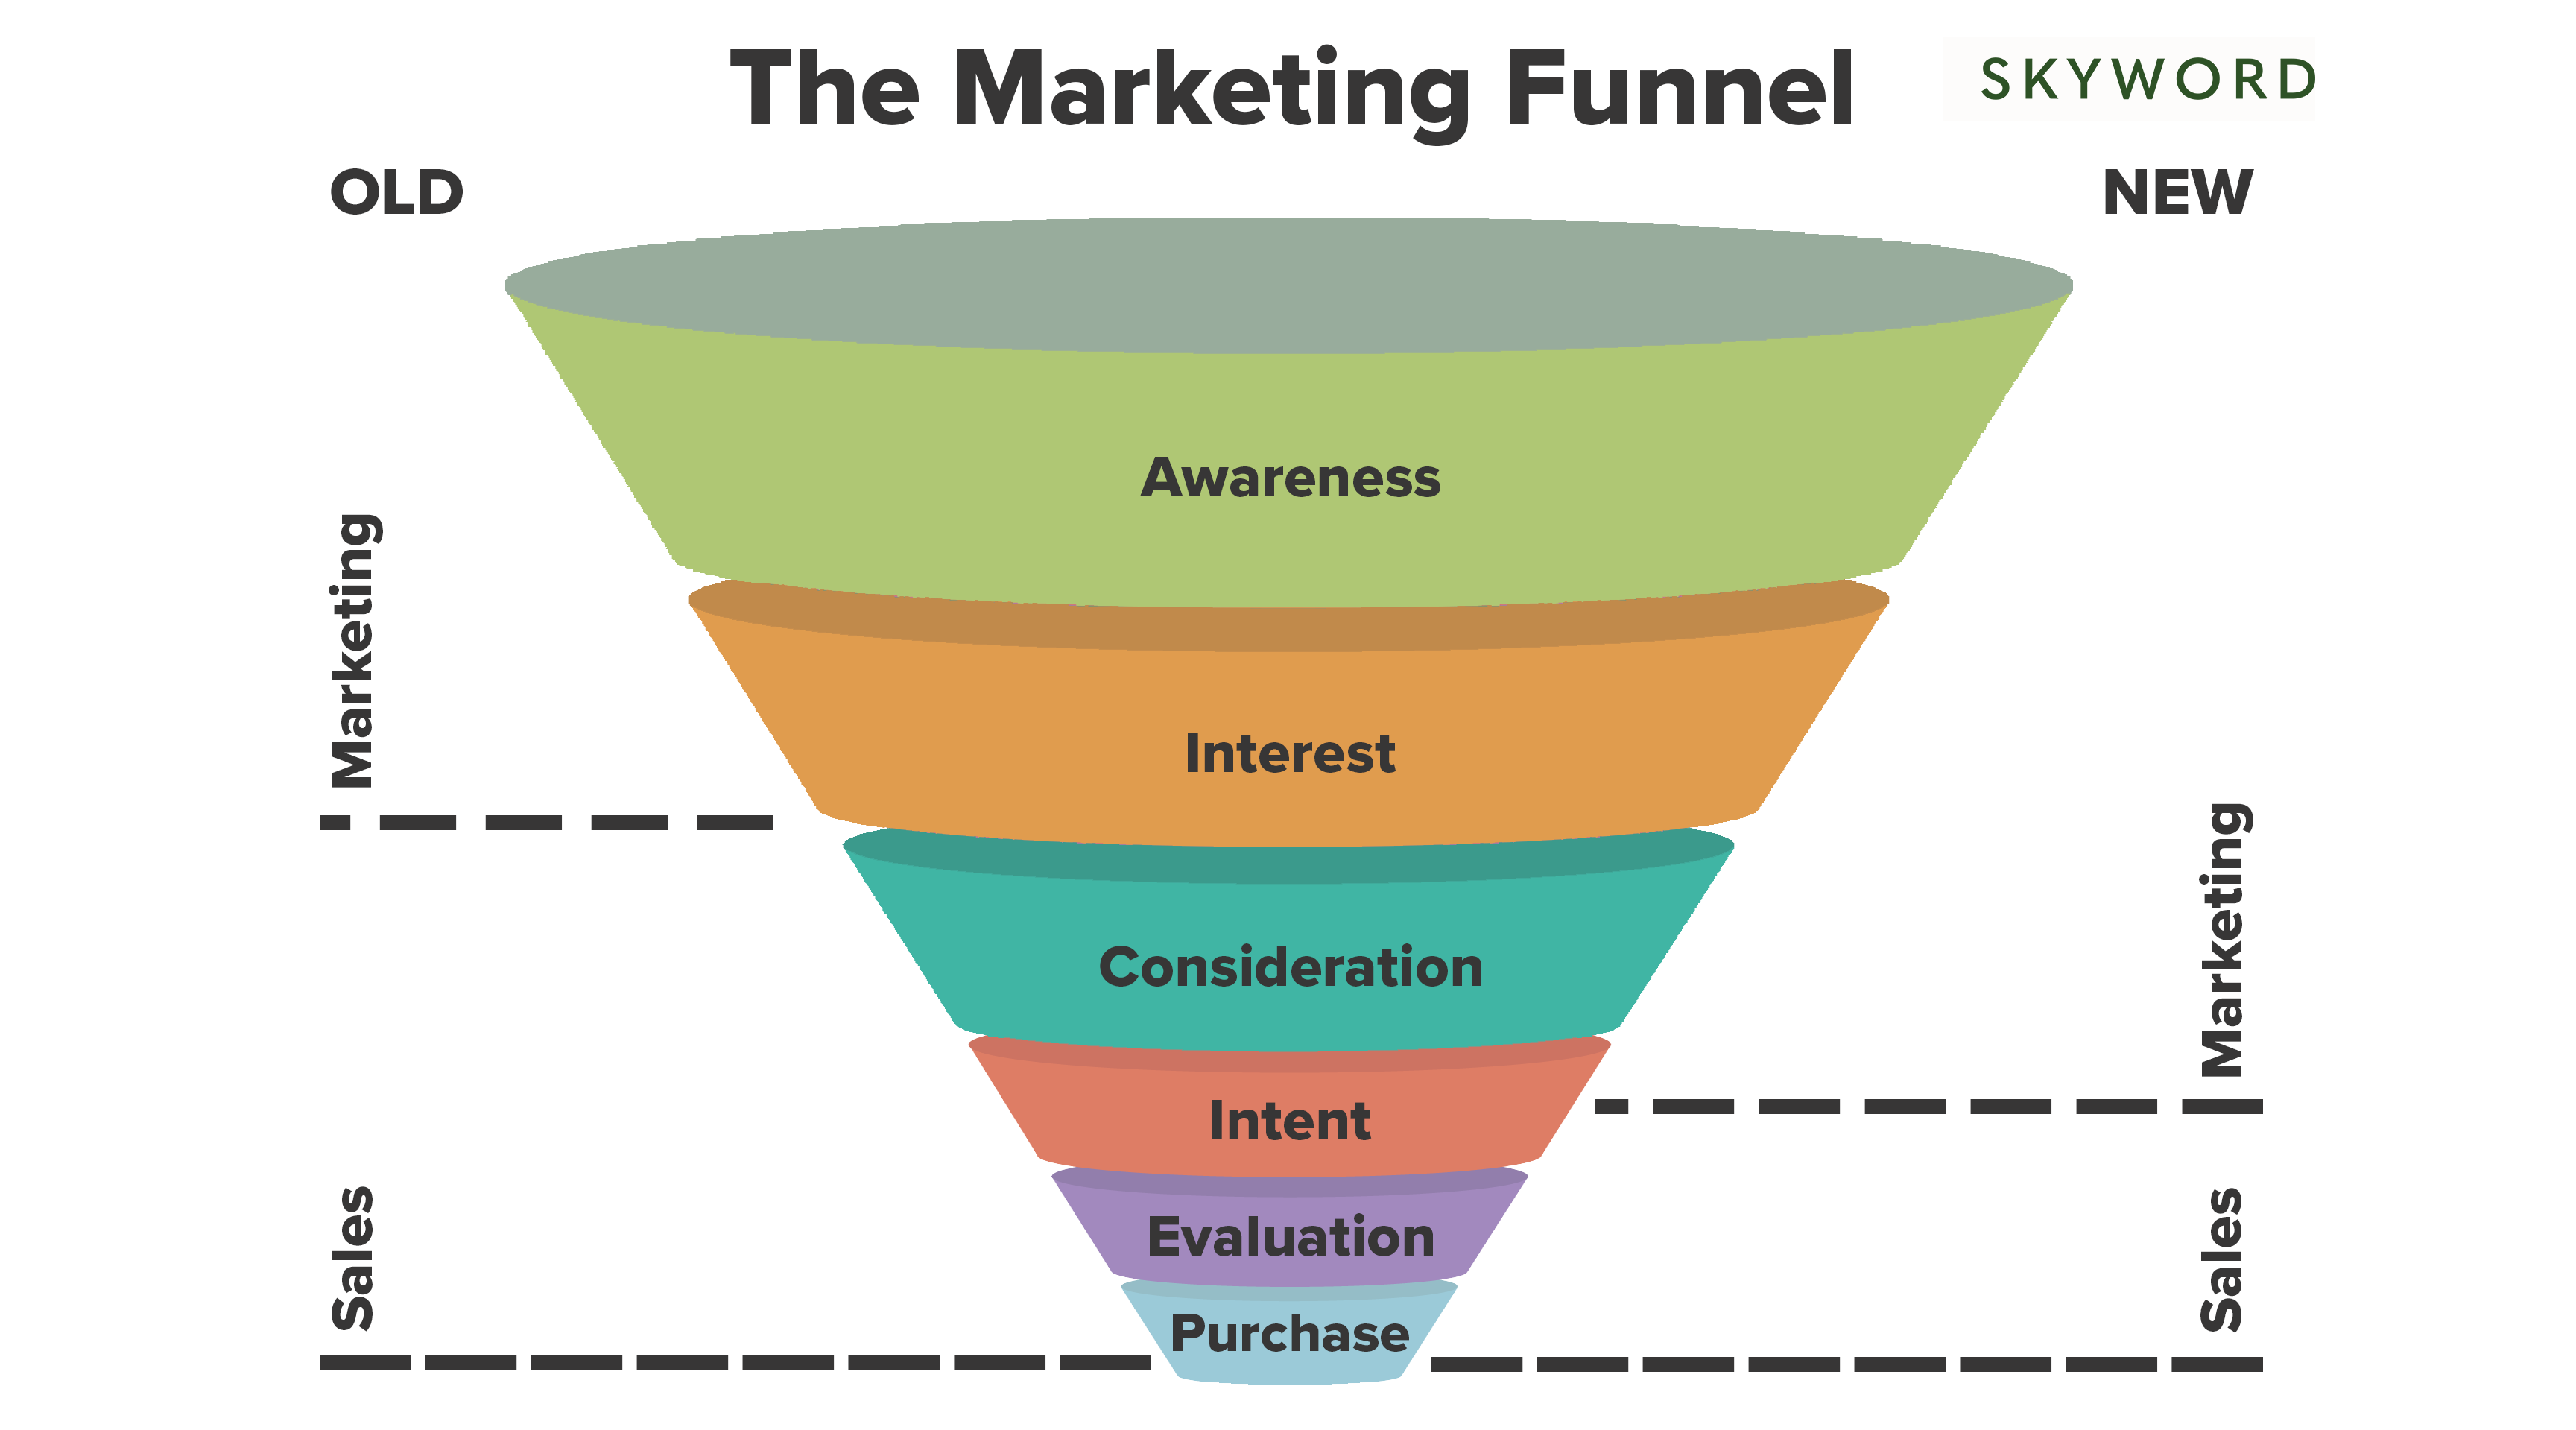 old and new marketing funnel diagram